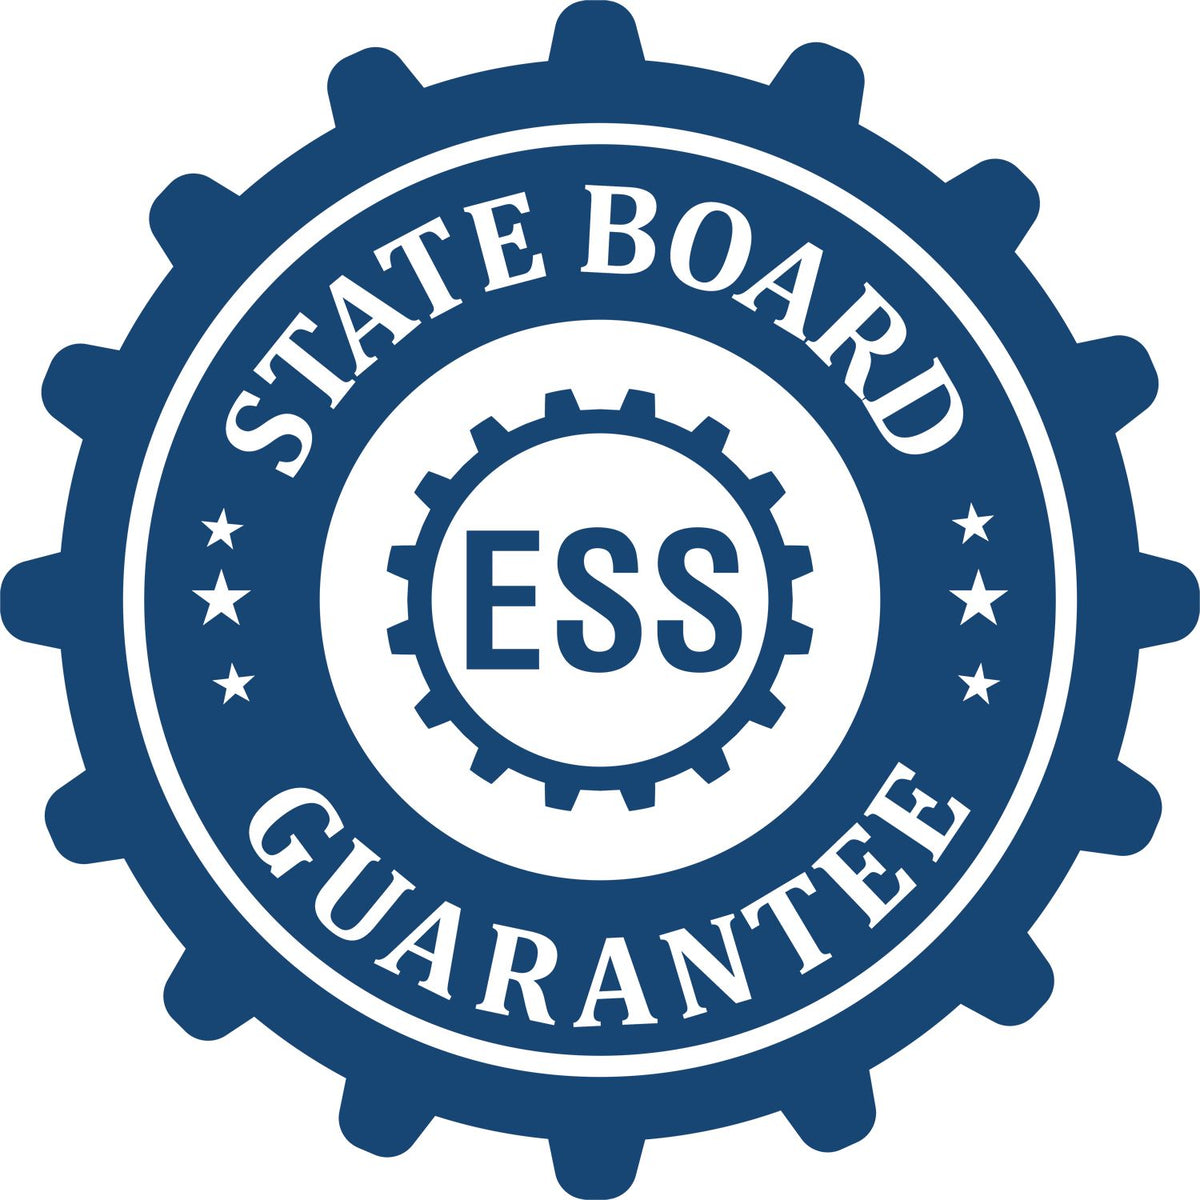 An emblem in a gear shape illustrating a state board guarantee for the Hybrid Missouri Geologist Seal